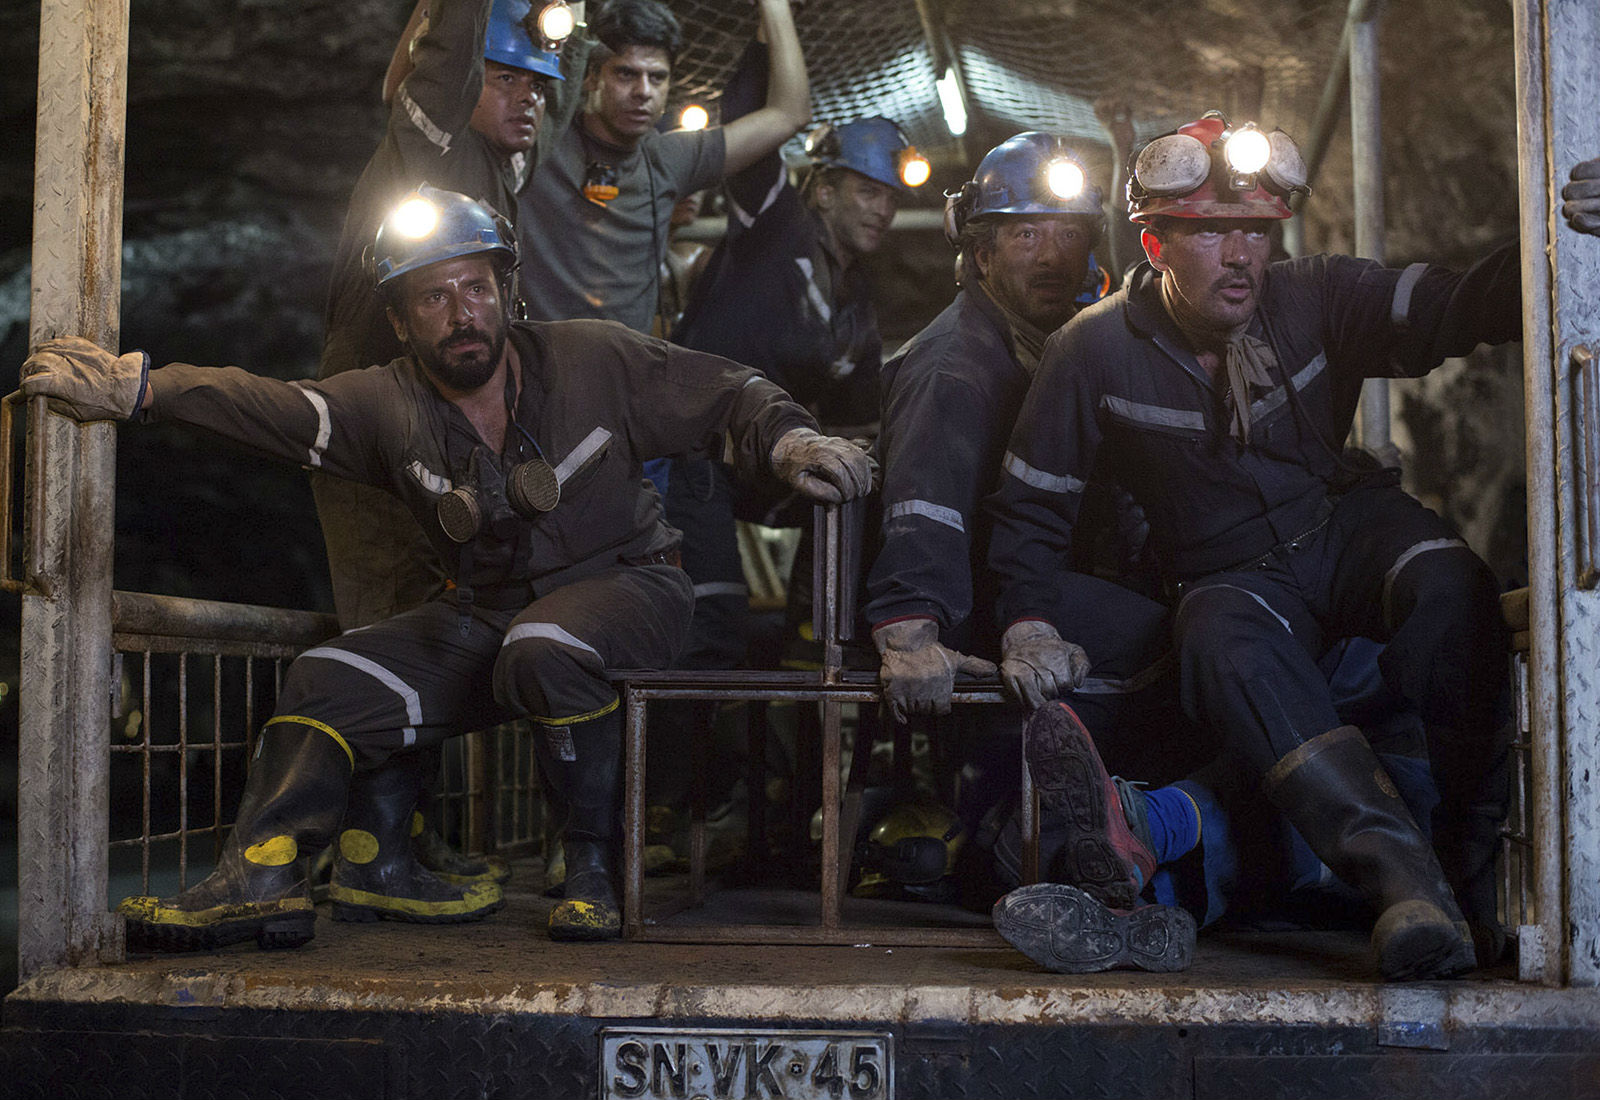 'The 33' movie review by Lucas Mirabella - LATF